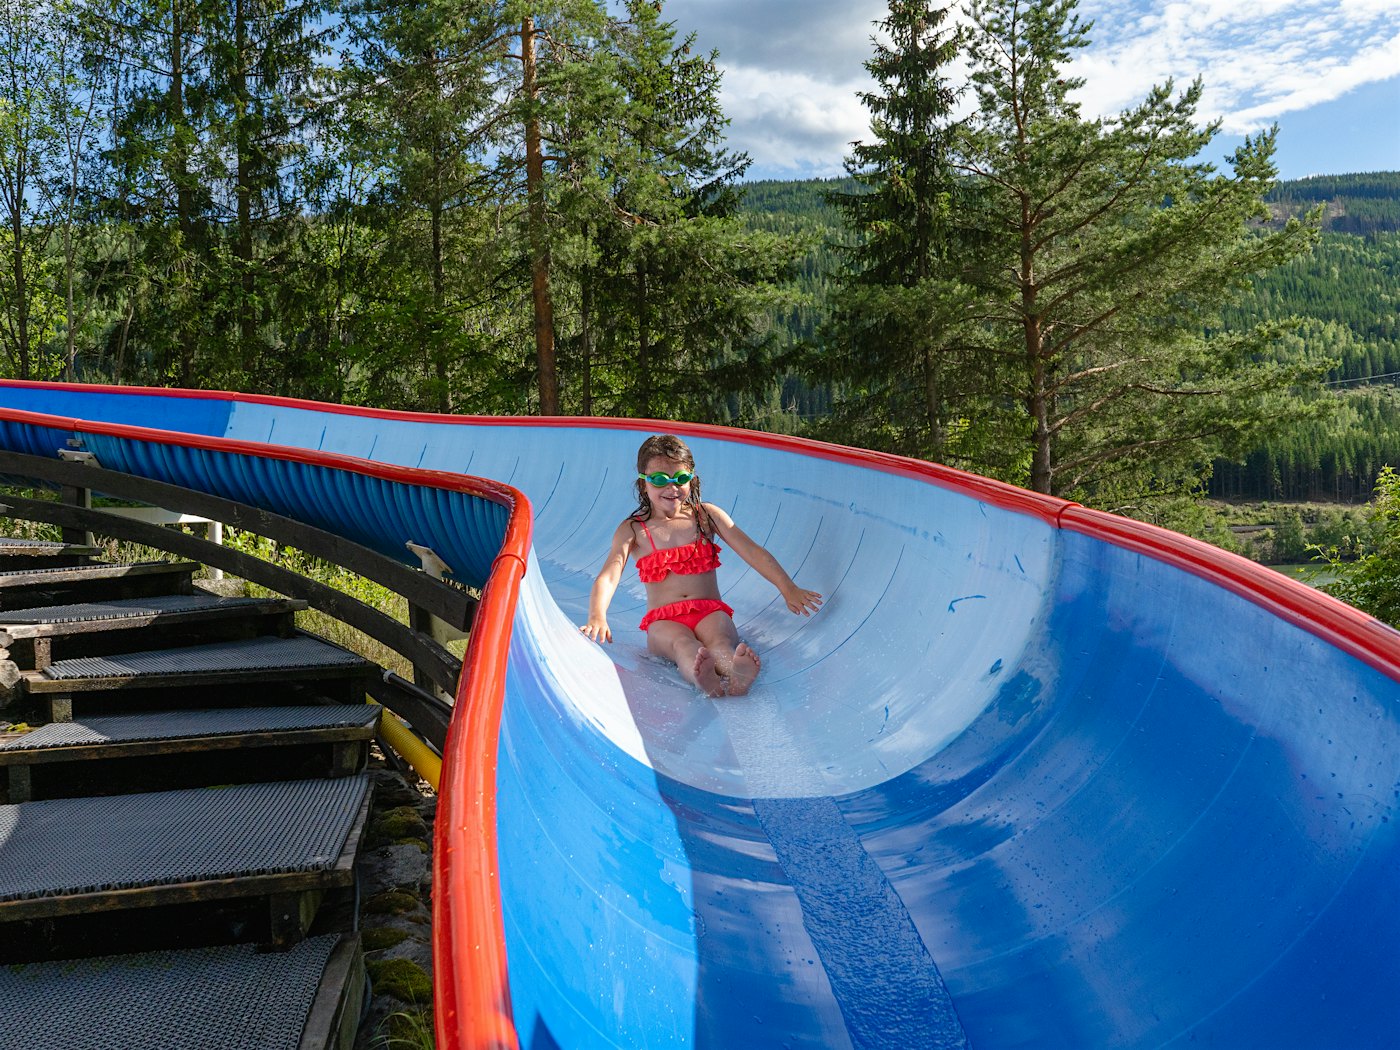 Girl slides down a large water slide. Photo